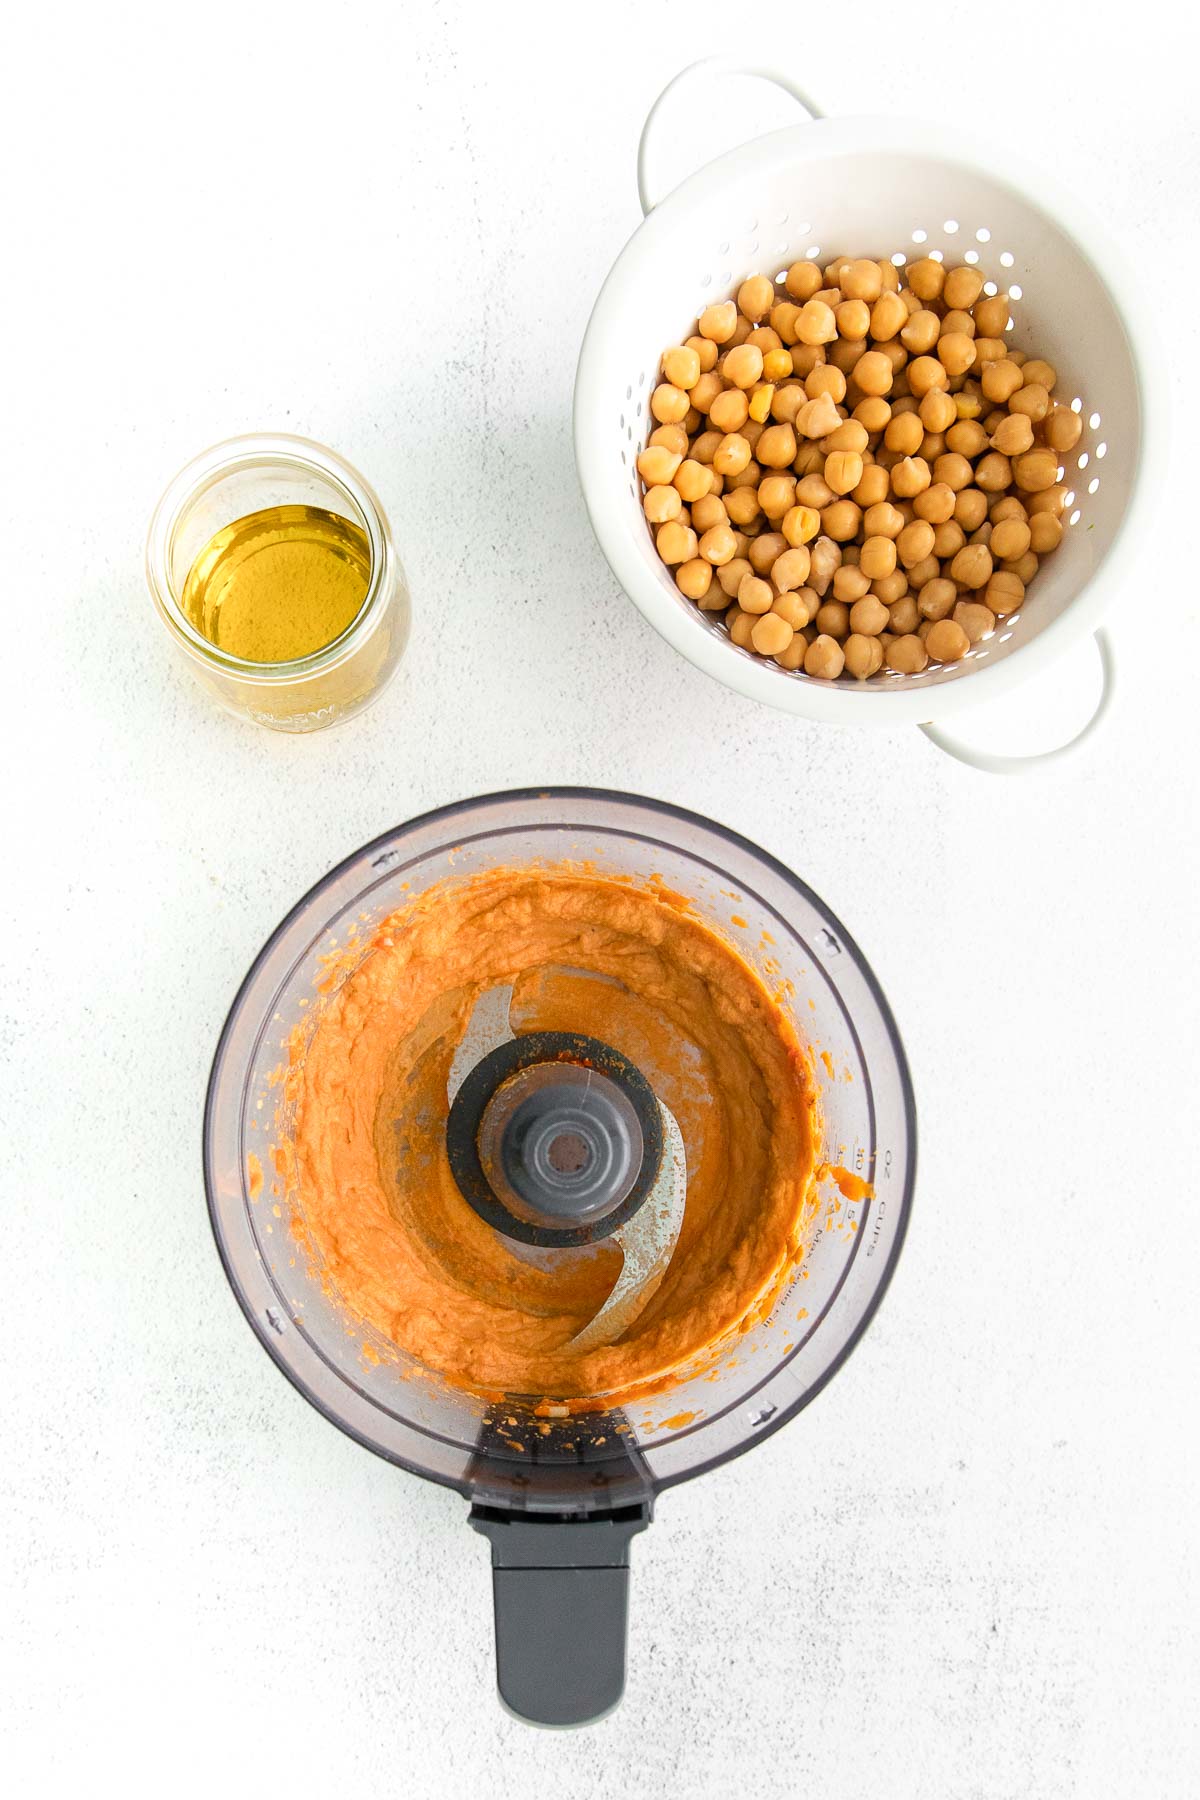 pumpkin puree in a food processor and a white colander of chickpeas and a little bowls of olive oil